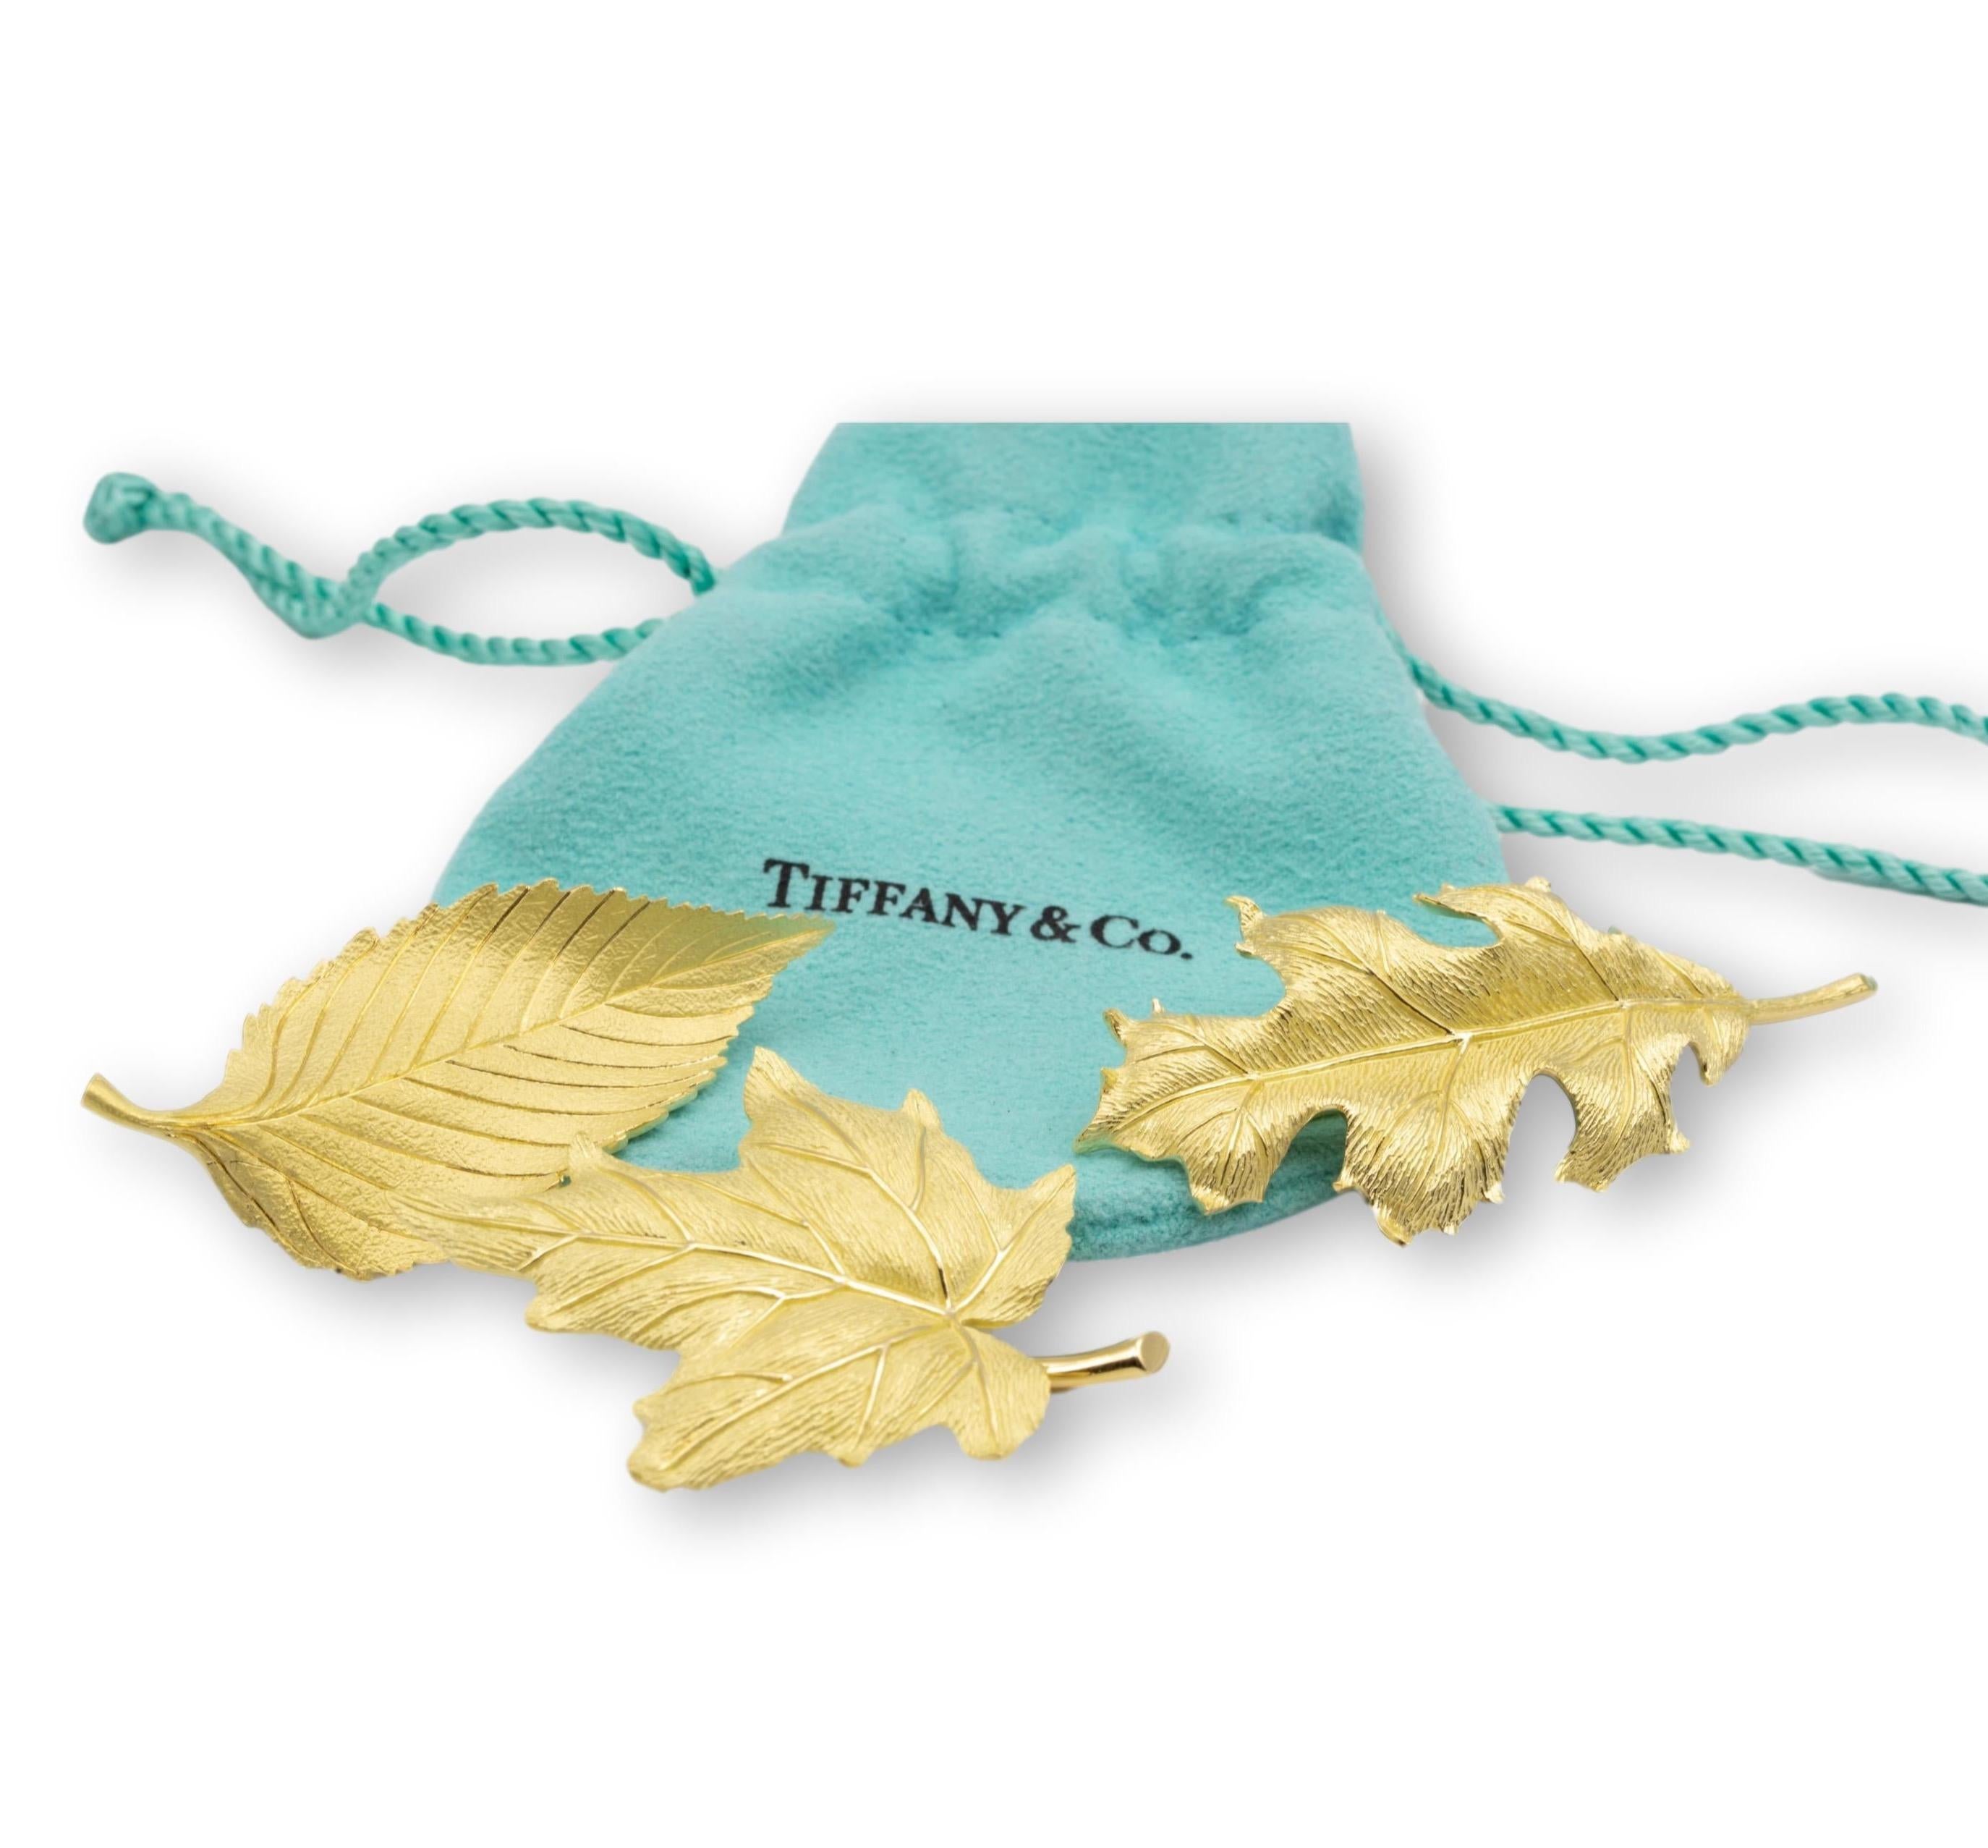 Set of 3 Vintage brooches by Tiffany & Co. finely crafted in 18 Karat yellow gold with a Florentine-matte finish (front) and high polish (back) delicately fashioned into a leaves theme of Sugar Maple , American Beech, and Red Oak